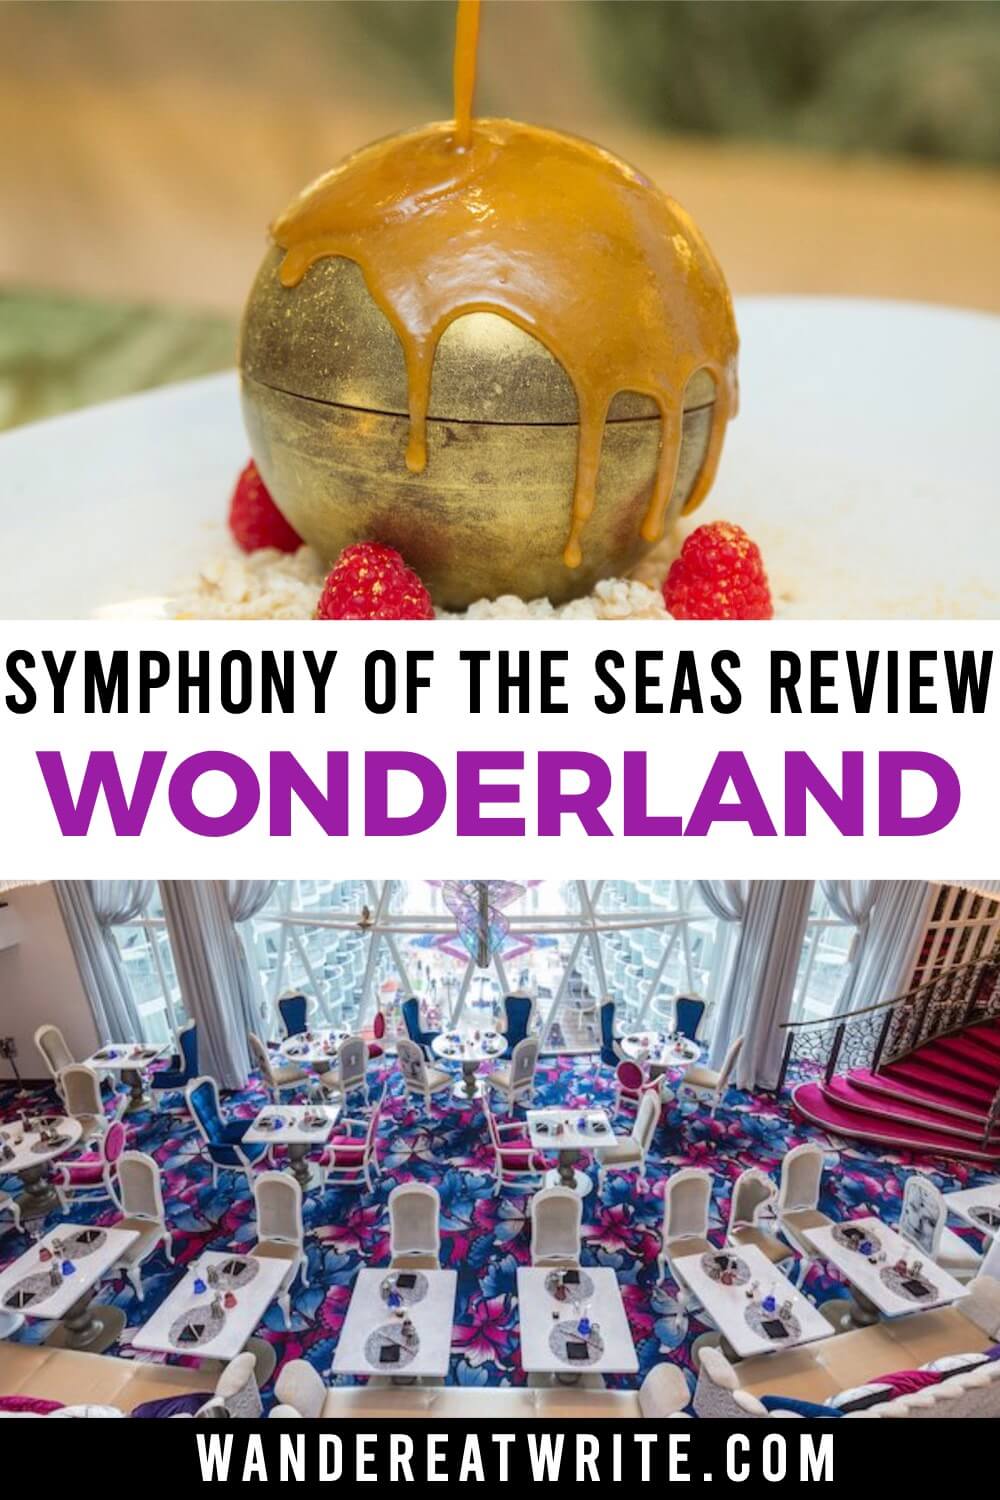 Pin text: Wonderland Symphony of the Seas Review. Top photo: a golden chocolate sphere being poured over by caramel syrup. Bottom photo: the whimsical interior of Wonderland. There is pink and blue carpet with multiple two-person rectangular tables. Each table has two place settings.